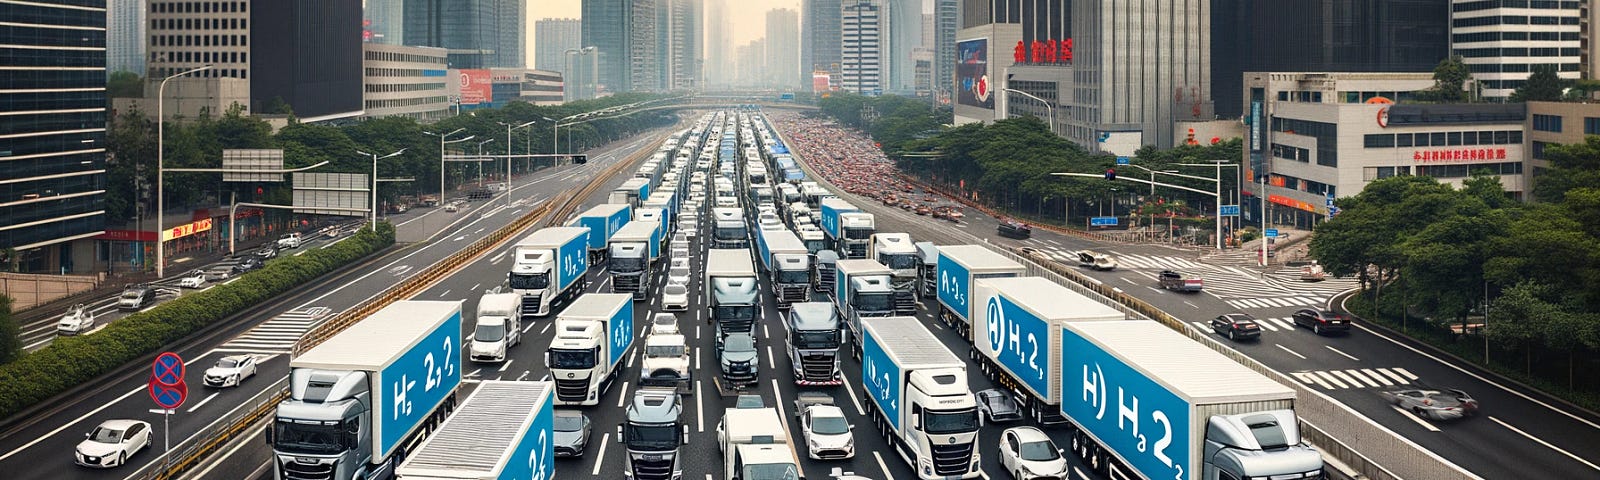 ChatGPT & DALL-E generated panoramic image of a traffic jam with only hydrogen-powered trucks and cars